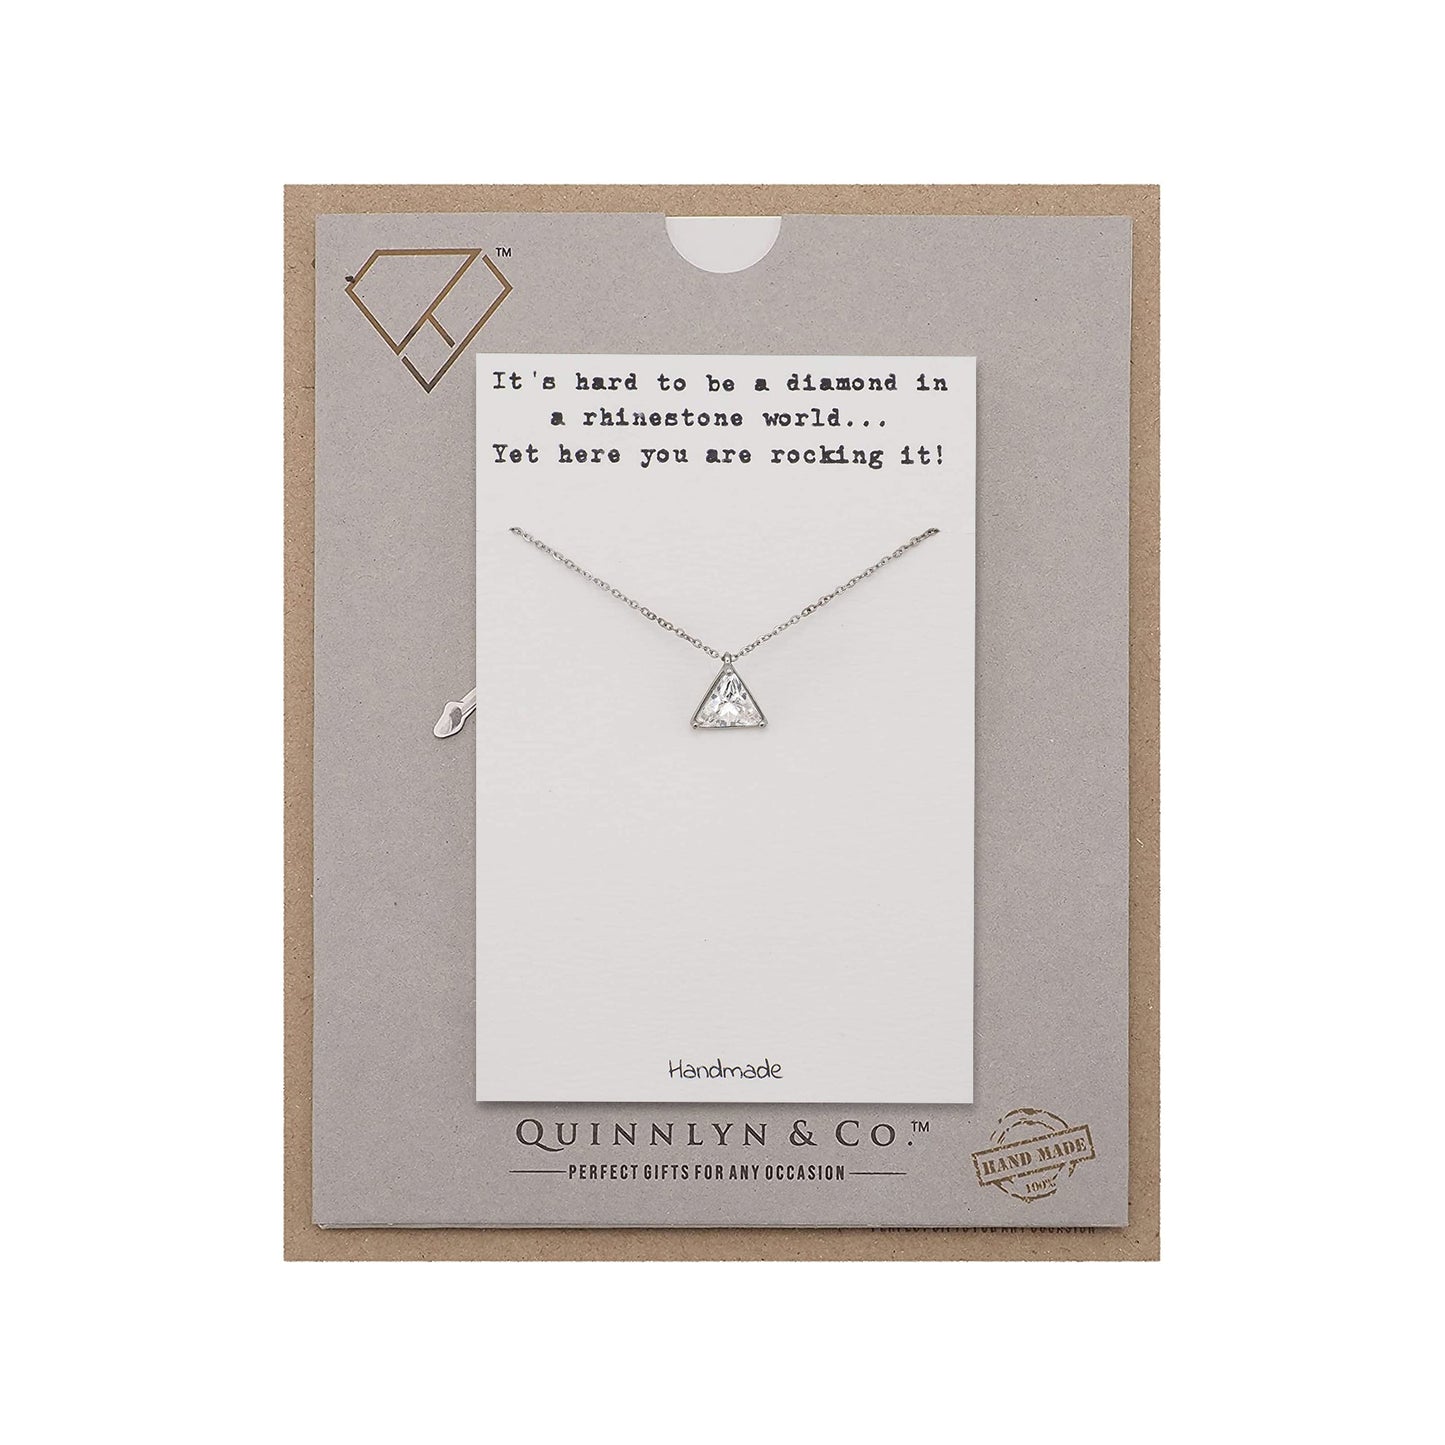 Quinnlyn & Co. CZ Solitaire in Triangle Shape Pendant Necklace, Handmade Gifts for Women with Inspirational Quote on Greeting Card